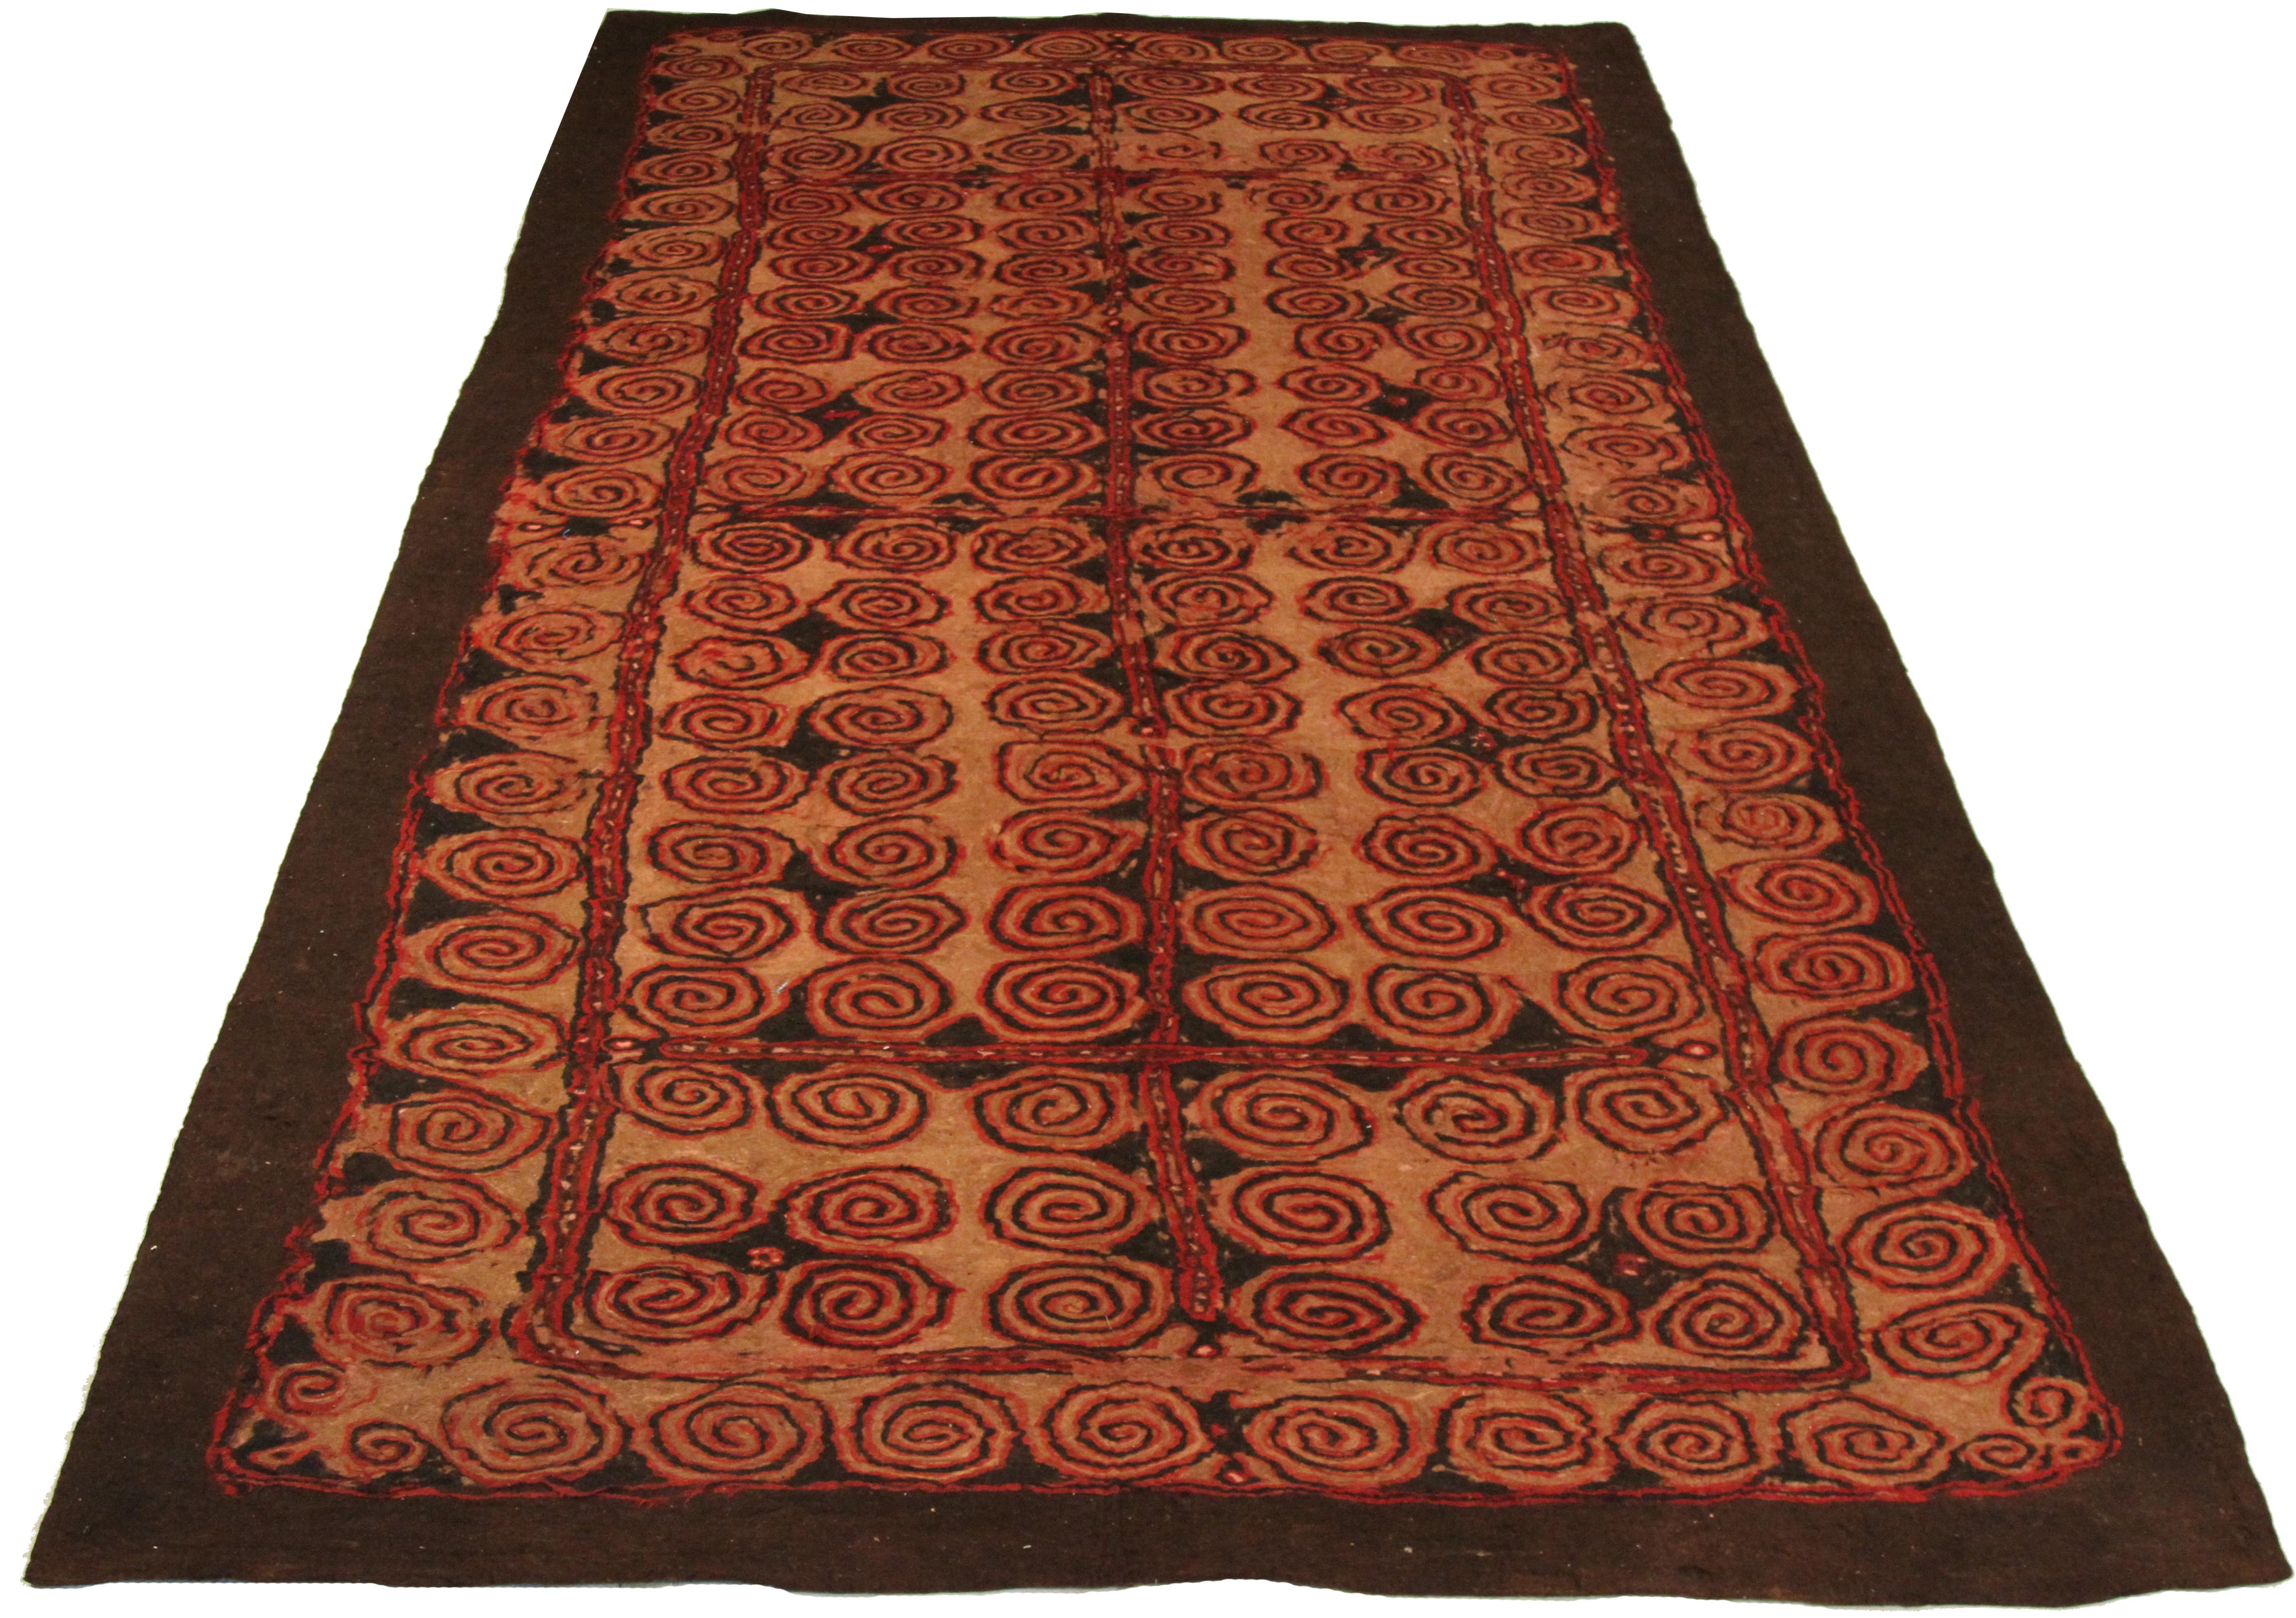 Vintage hand woven Persian rug made from fine wool and all-natural vegetable dyes that are safe for people and pets. This beautiful piece features simple patterns heavily influenced by nomadic lifestyle of different tribes in Iran. Nomad rugs are